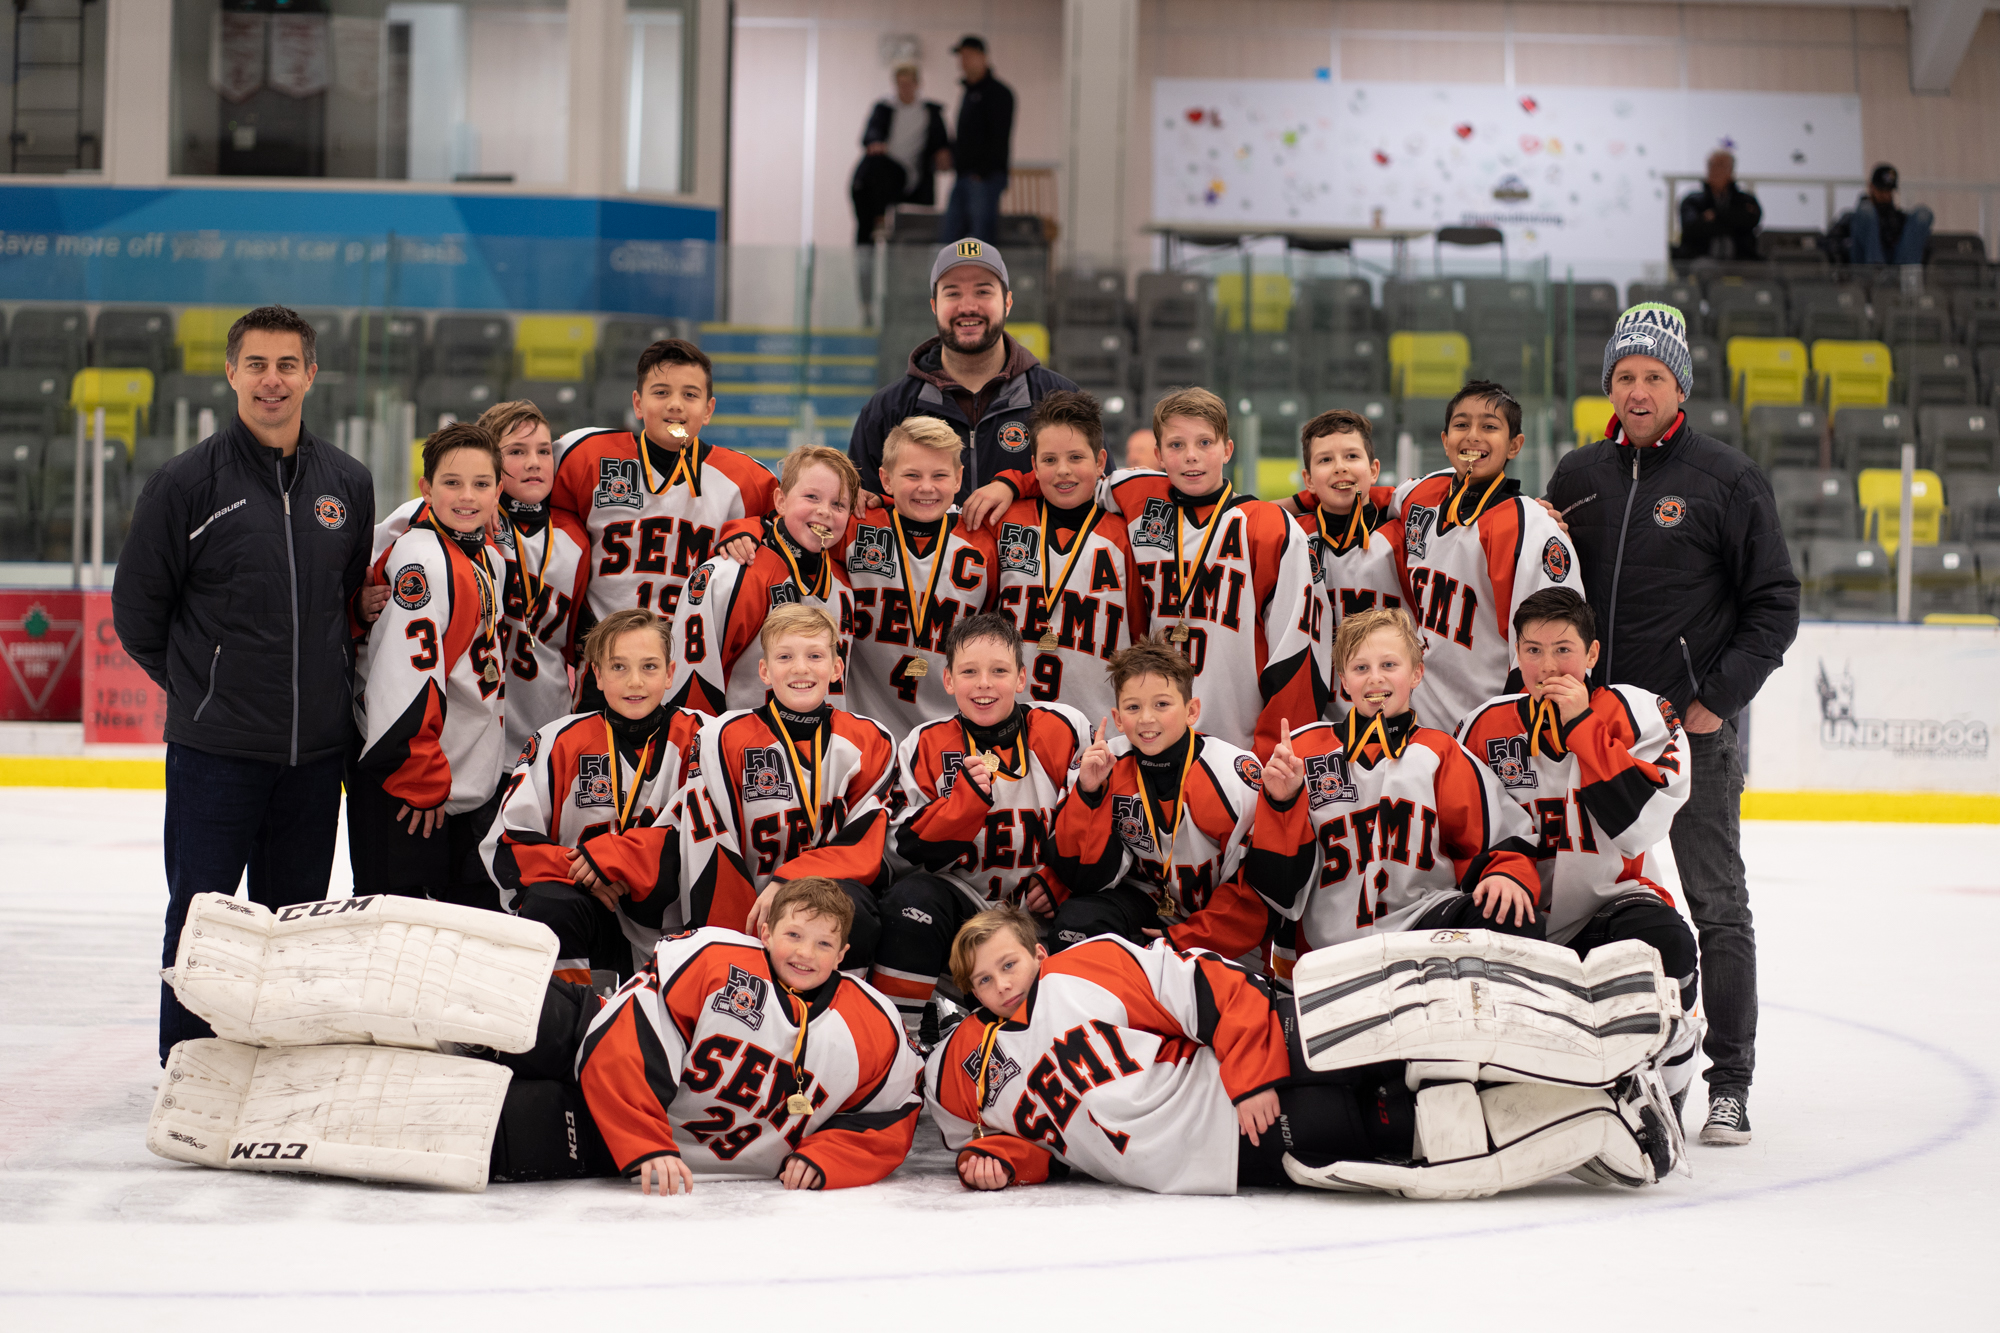 Congratulations to Peewee A2 who took GOLD in Tier 2 at the Coquitlam MHA Peewee A Gold Classic. 